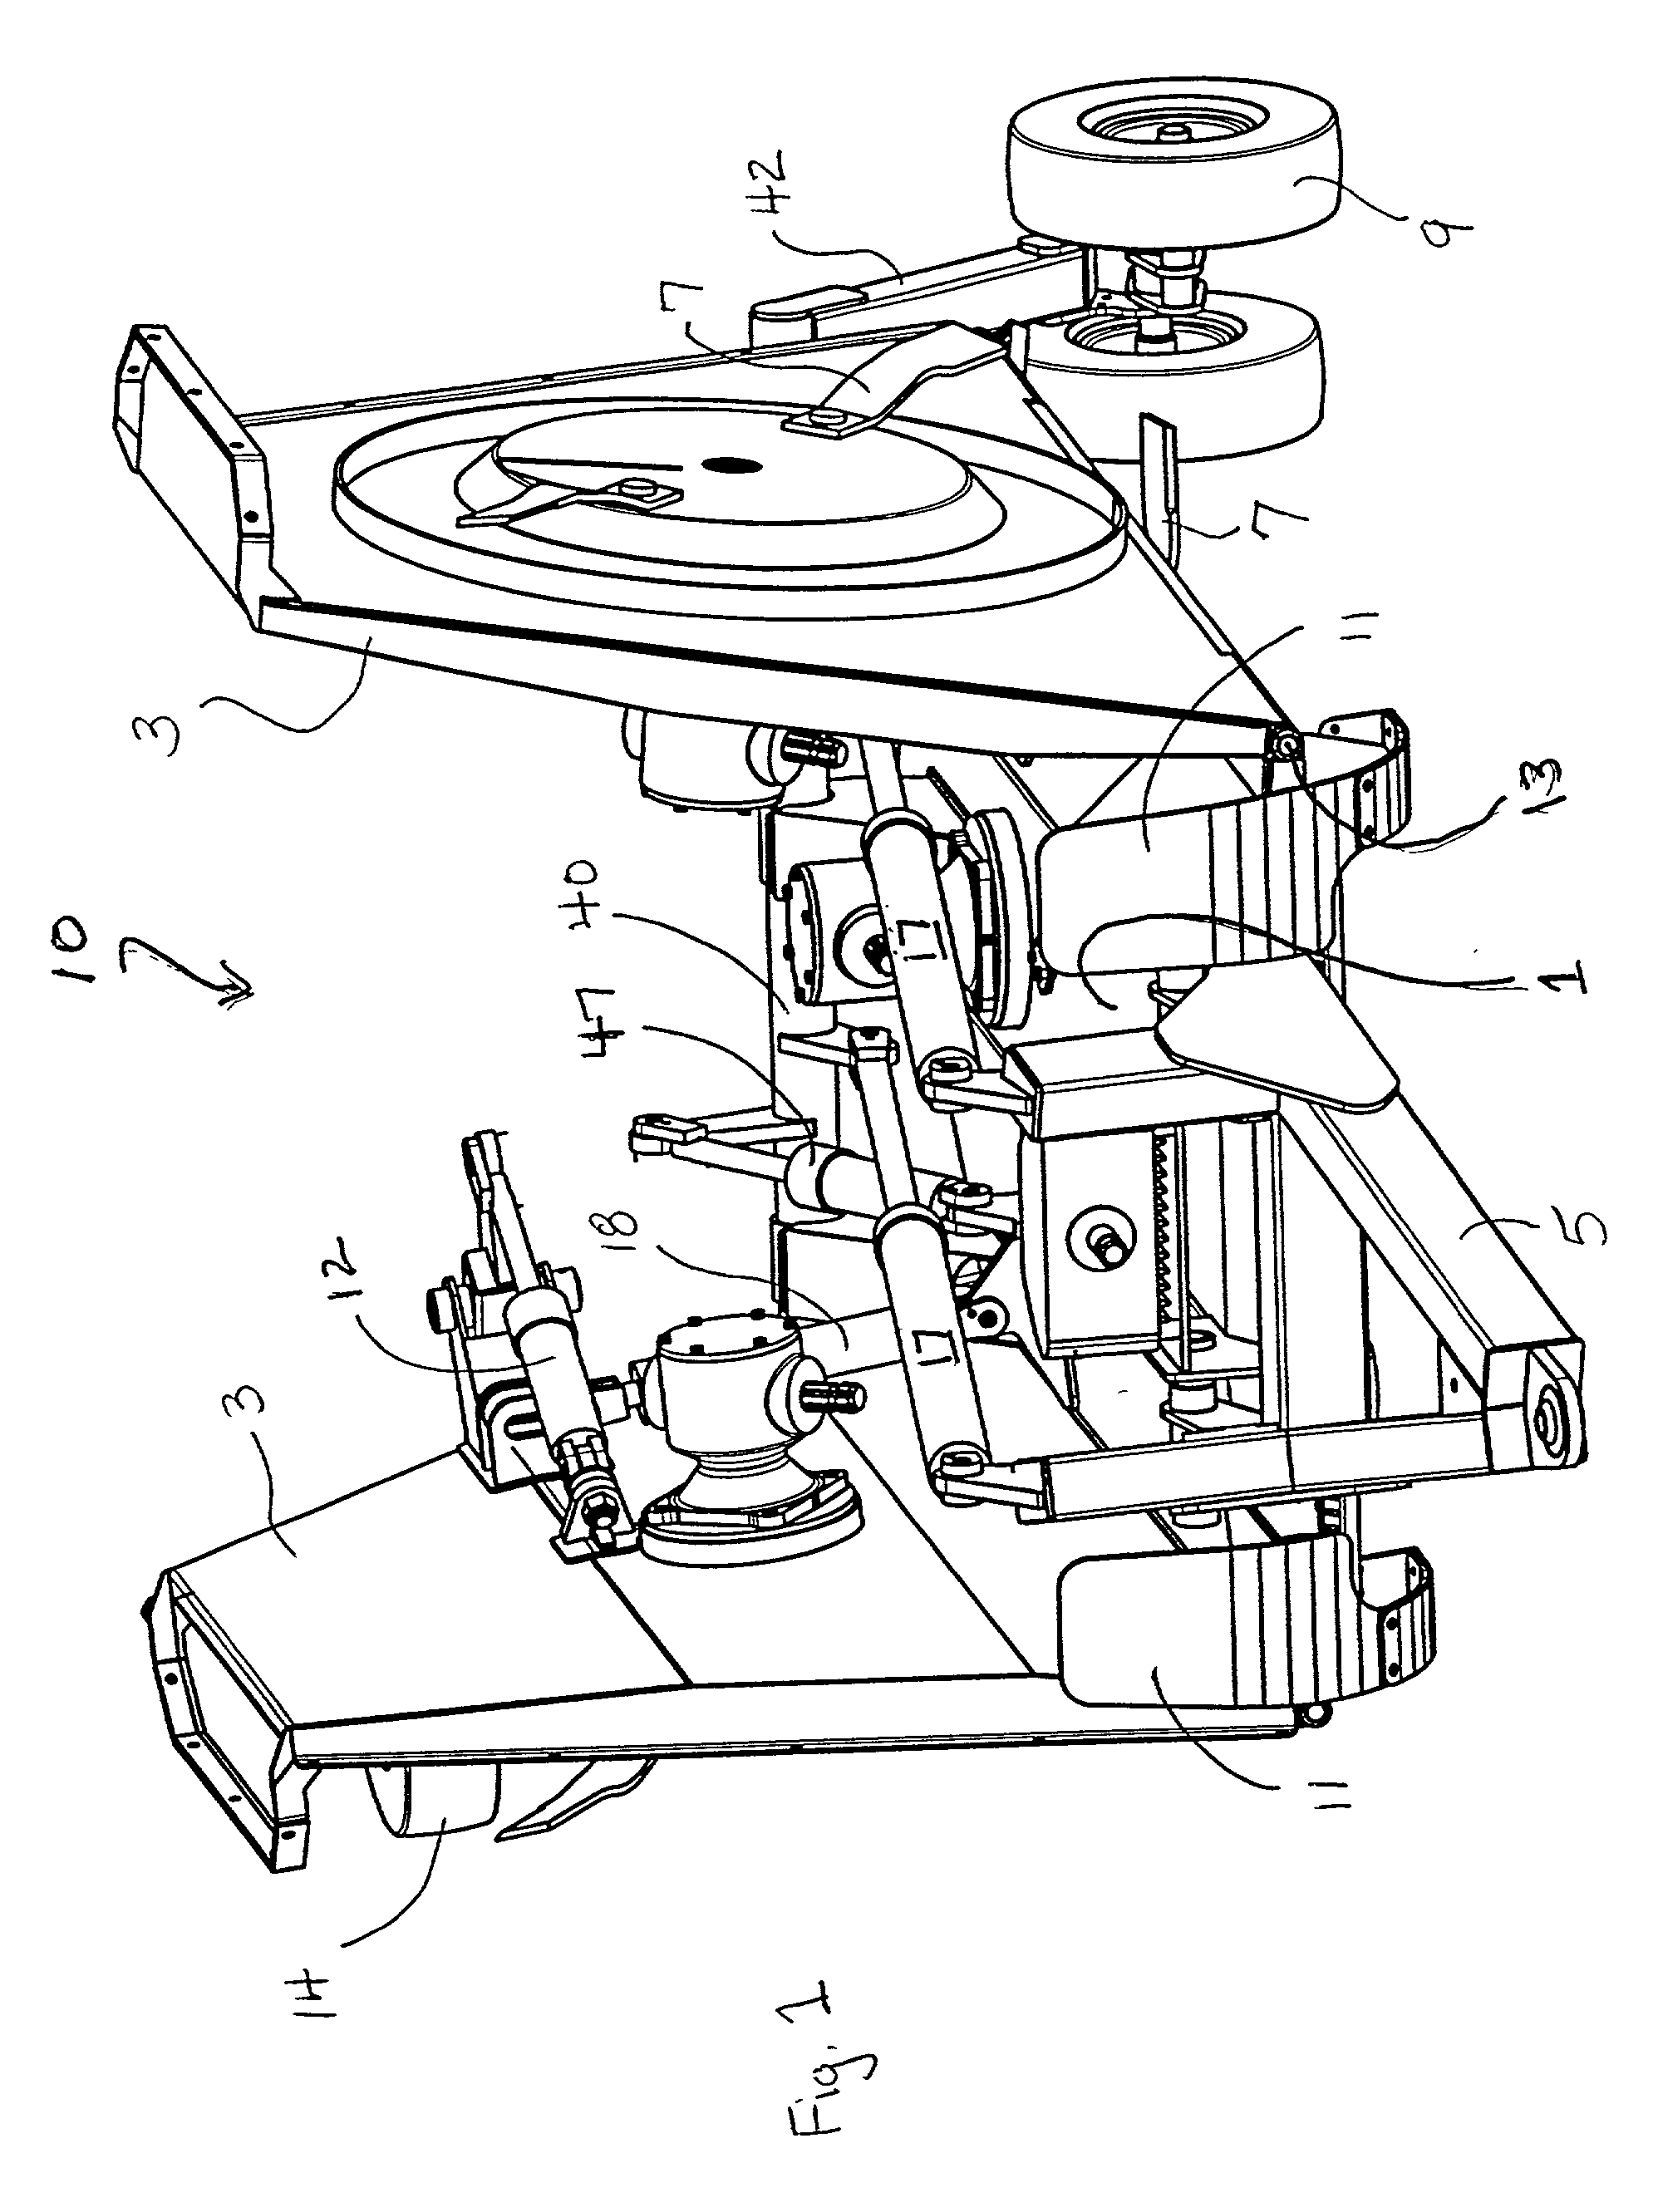 Articulated rotary mower